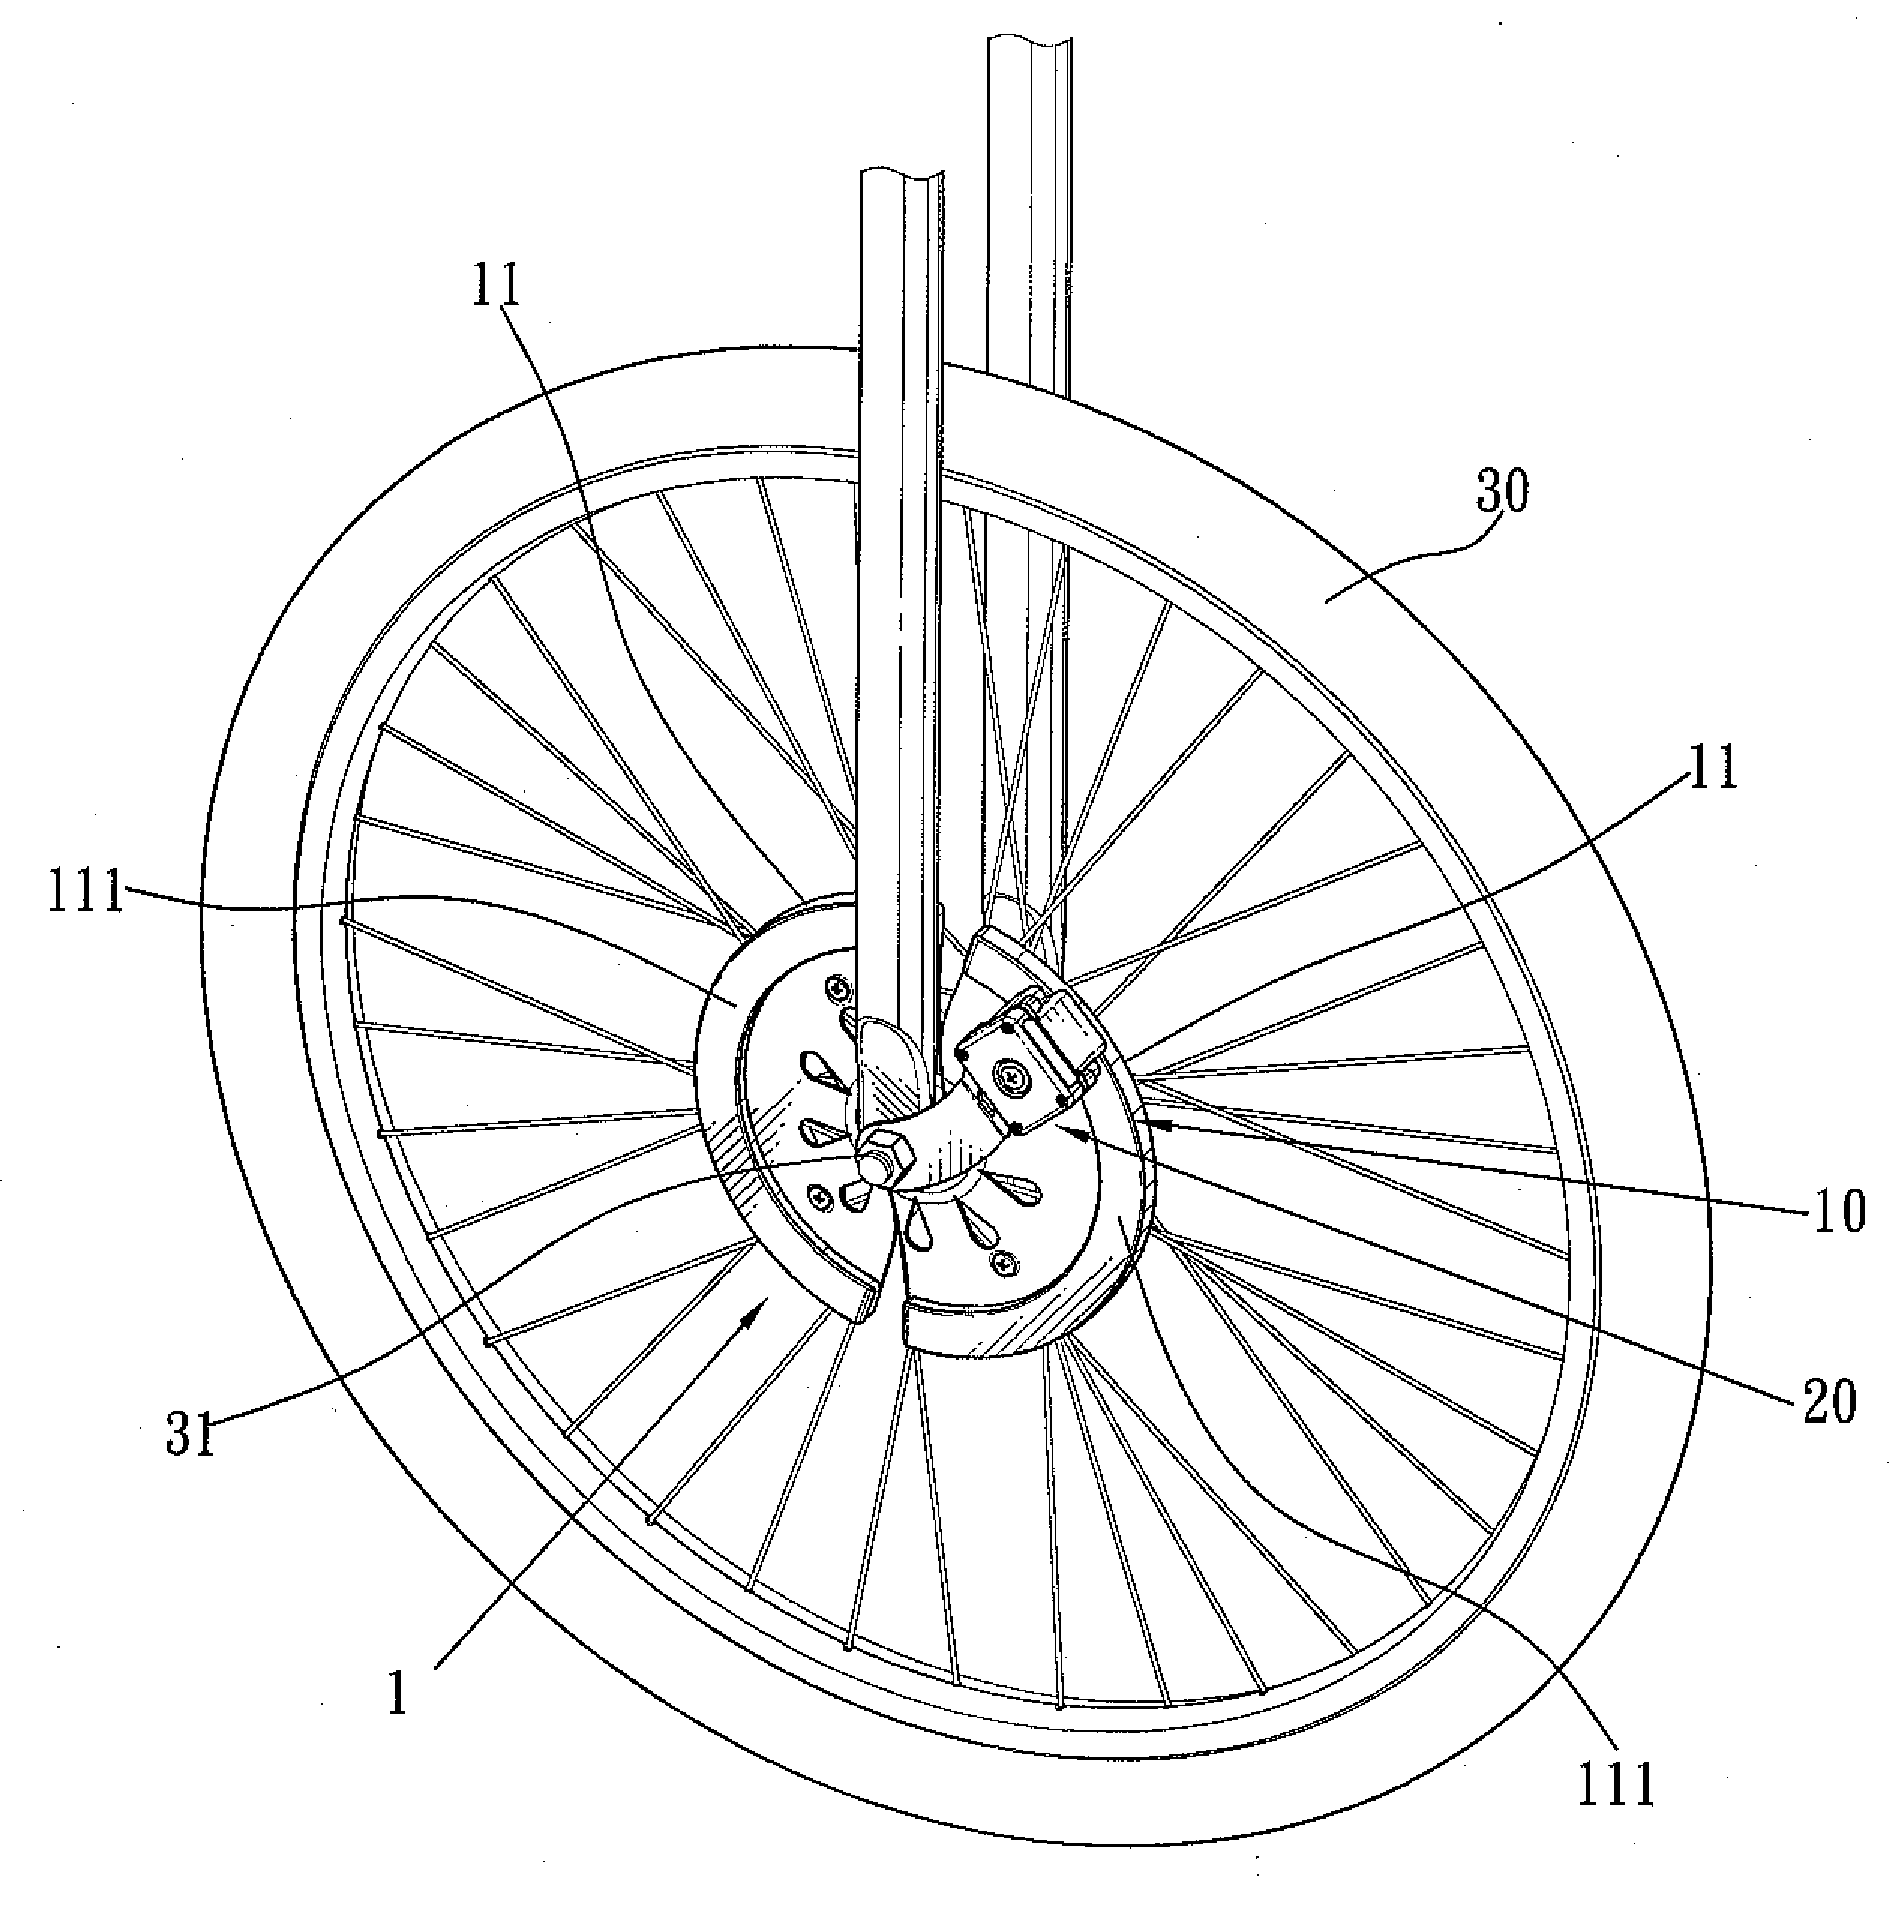 Generating apparatus using magnetic induction to generate electrical energy to provide illuminating function